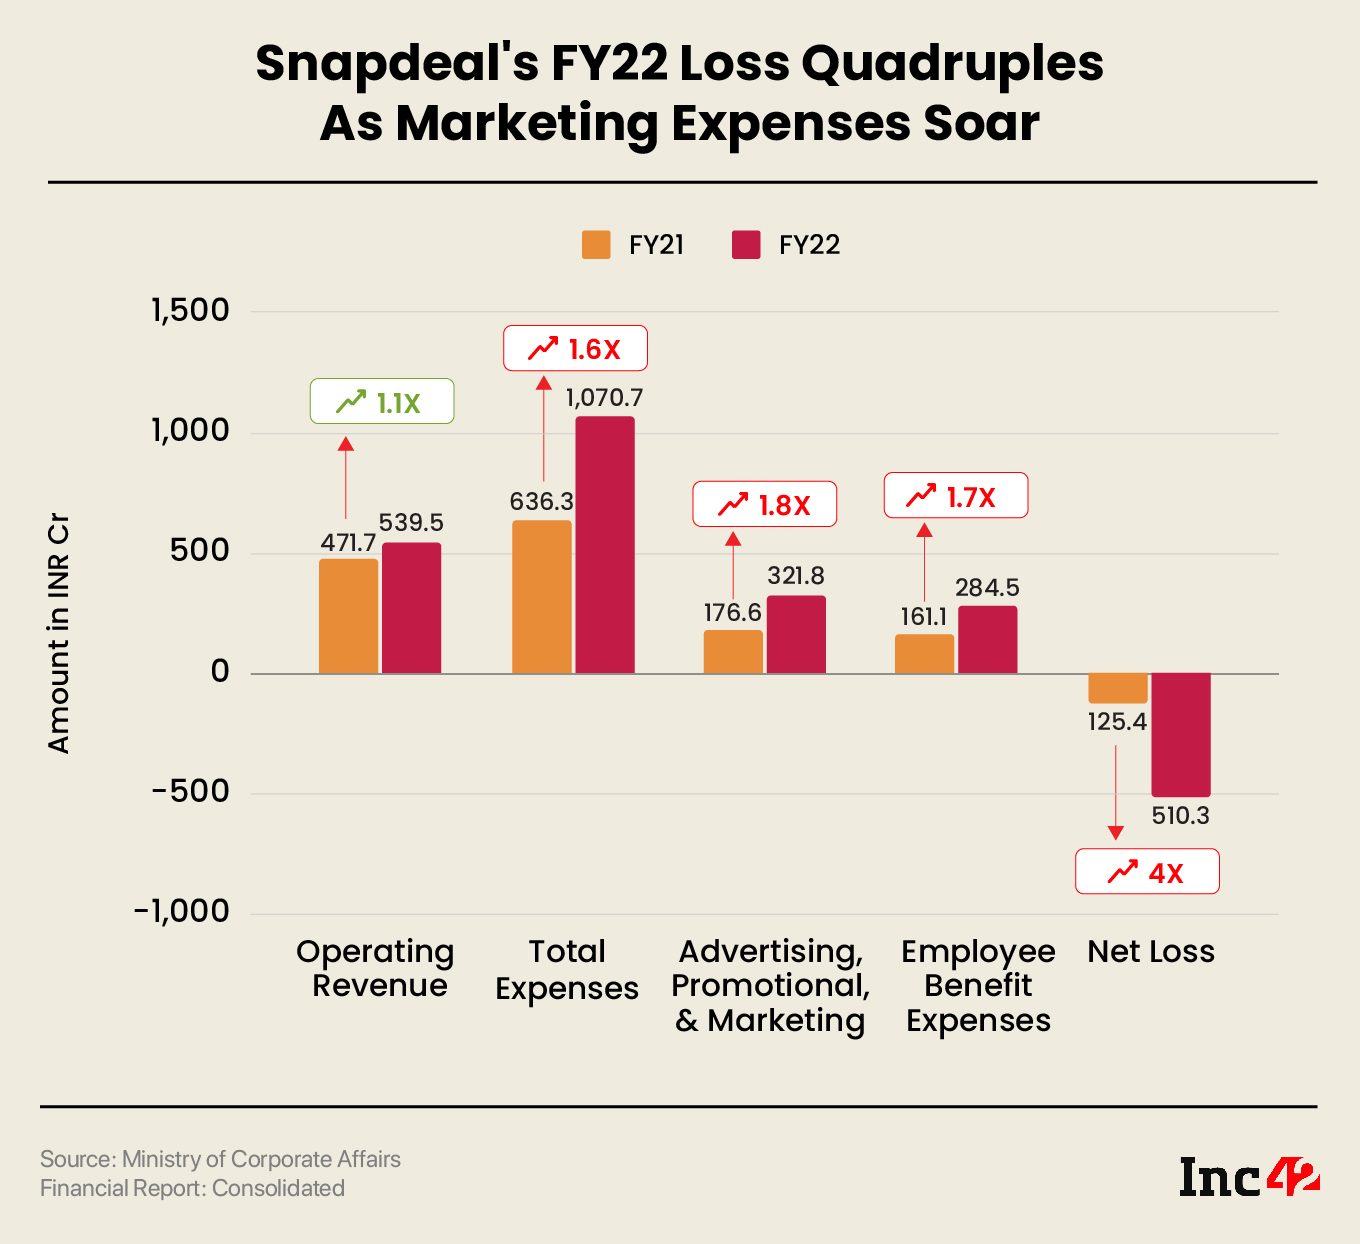 Snapdeal’s Loss Quadruples To INR 510 Cr In FY22, Sales Rise 14% To INR 540 Cr